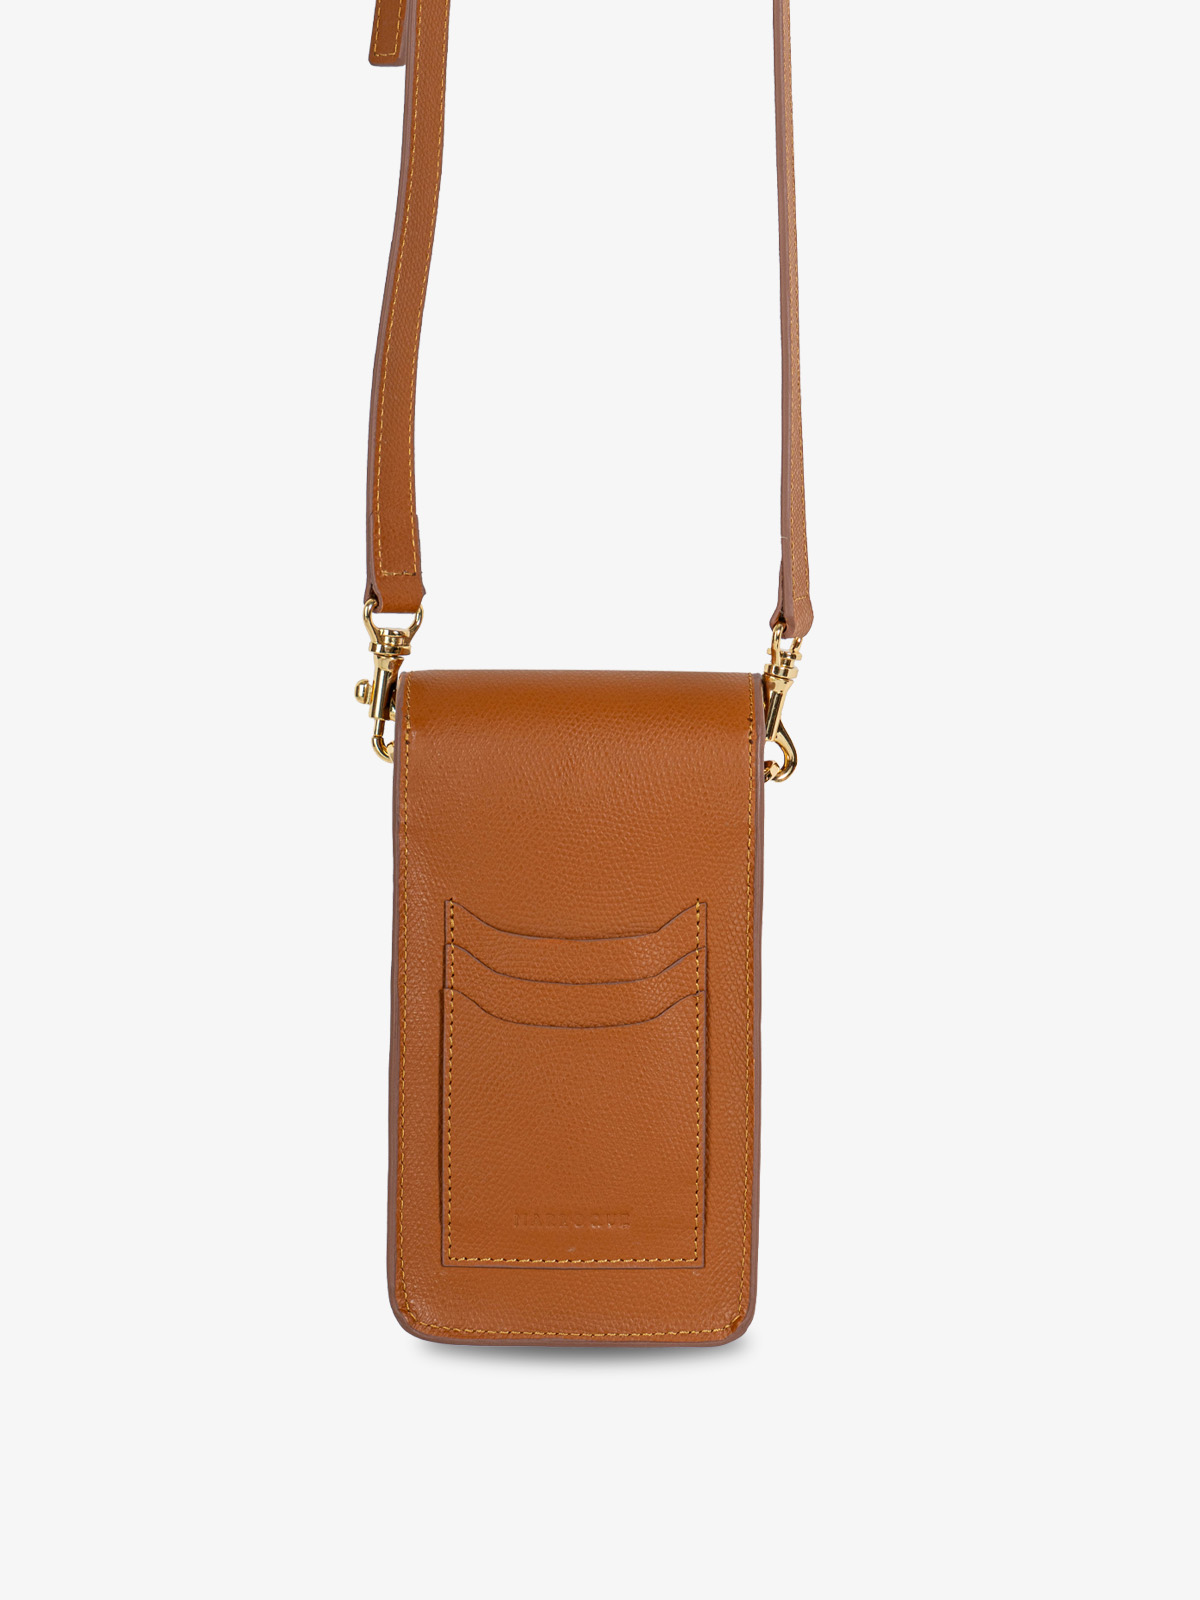 marroque-Abbey-leather-phonebag-camel